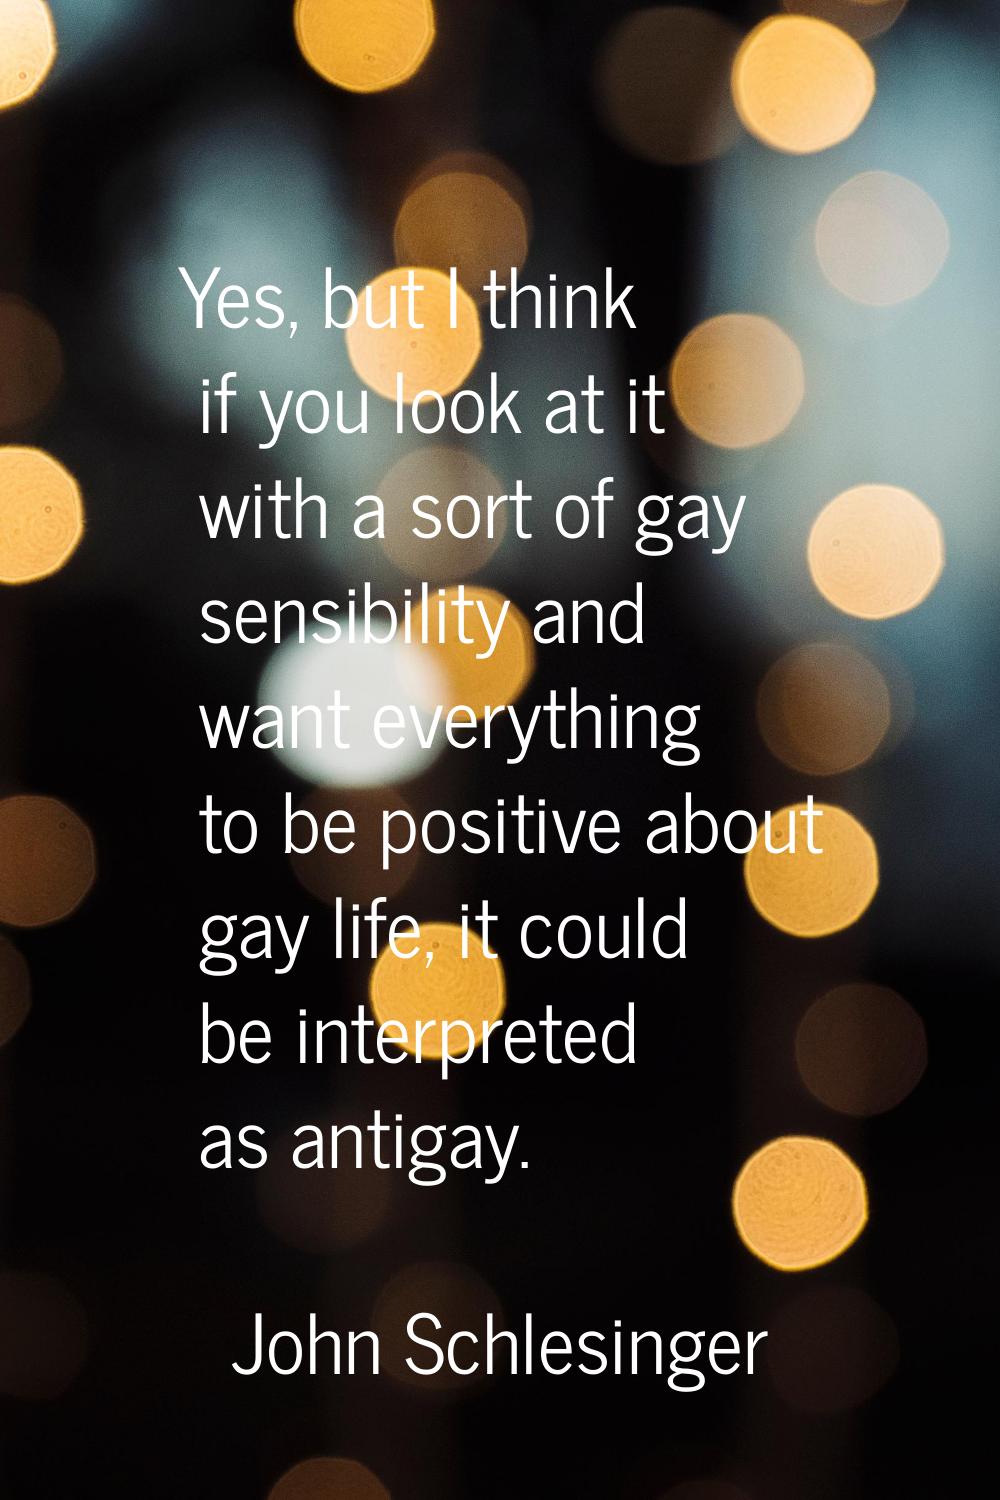 Yes, but I think if you look at it with a sort of gay sensibility and want everything to be positiv